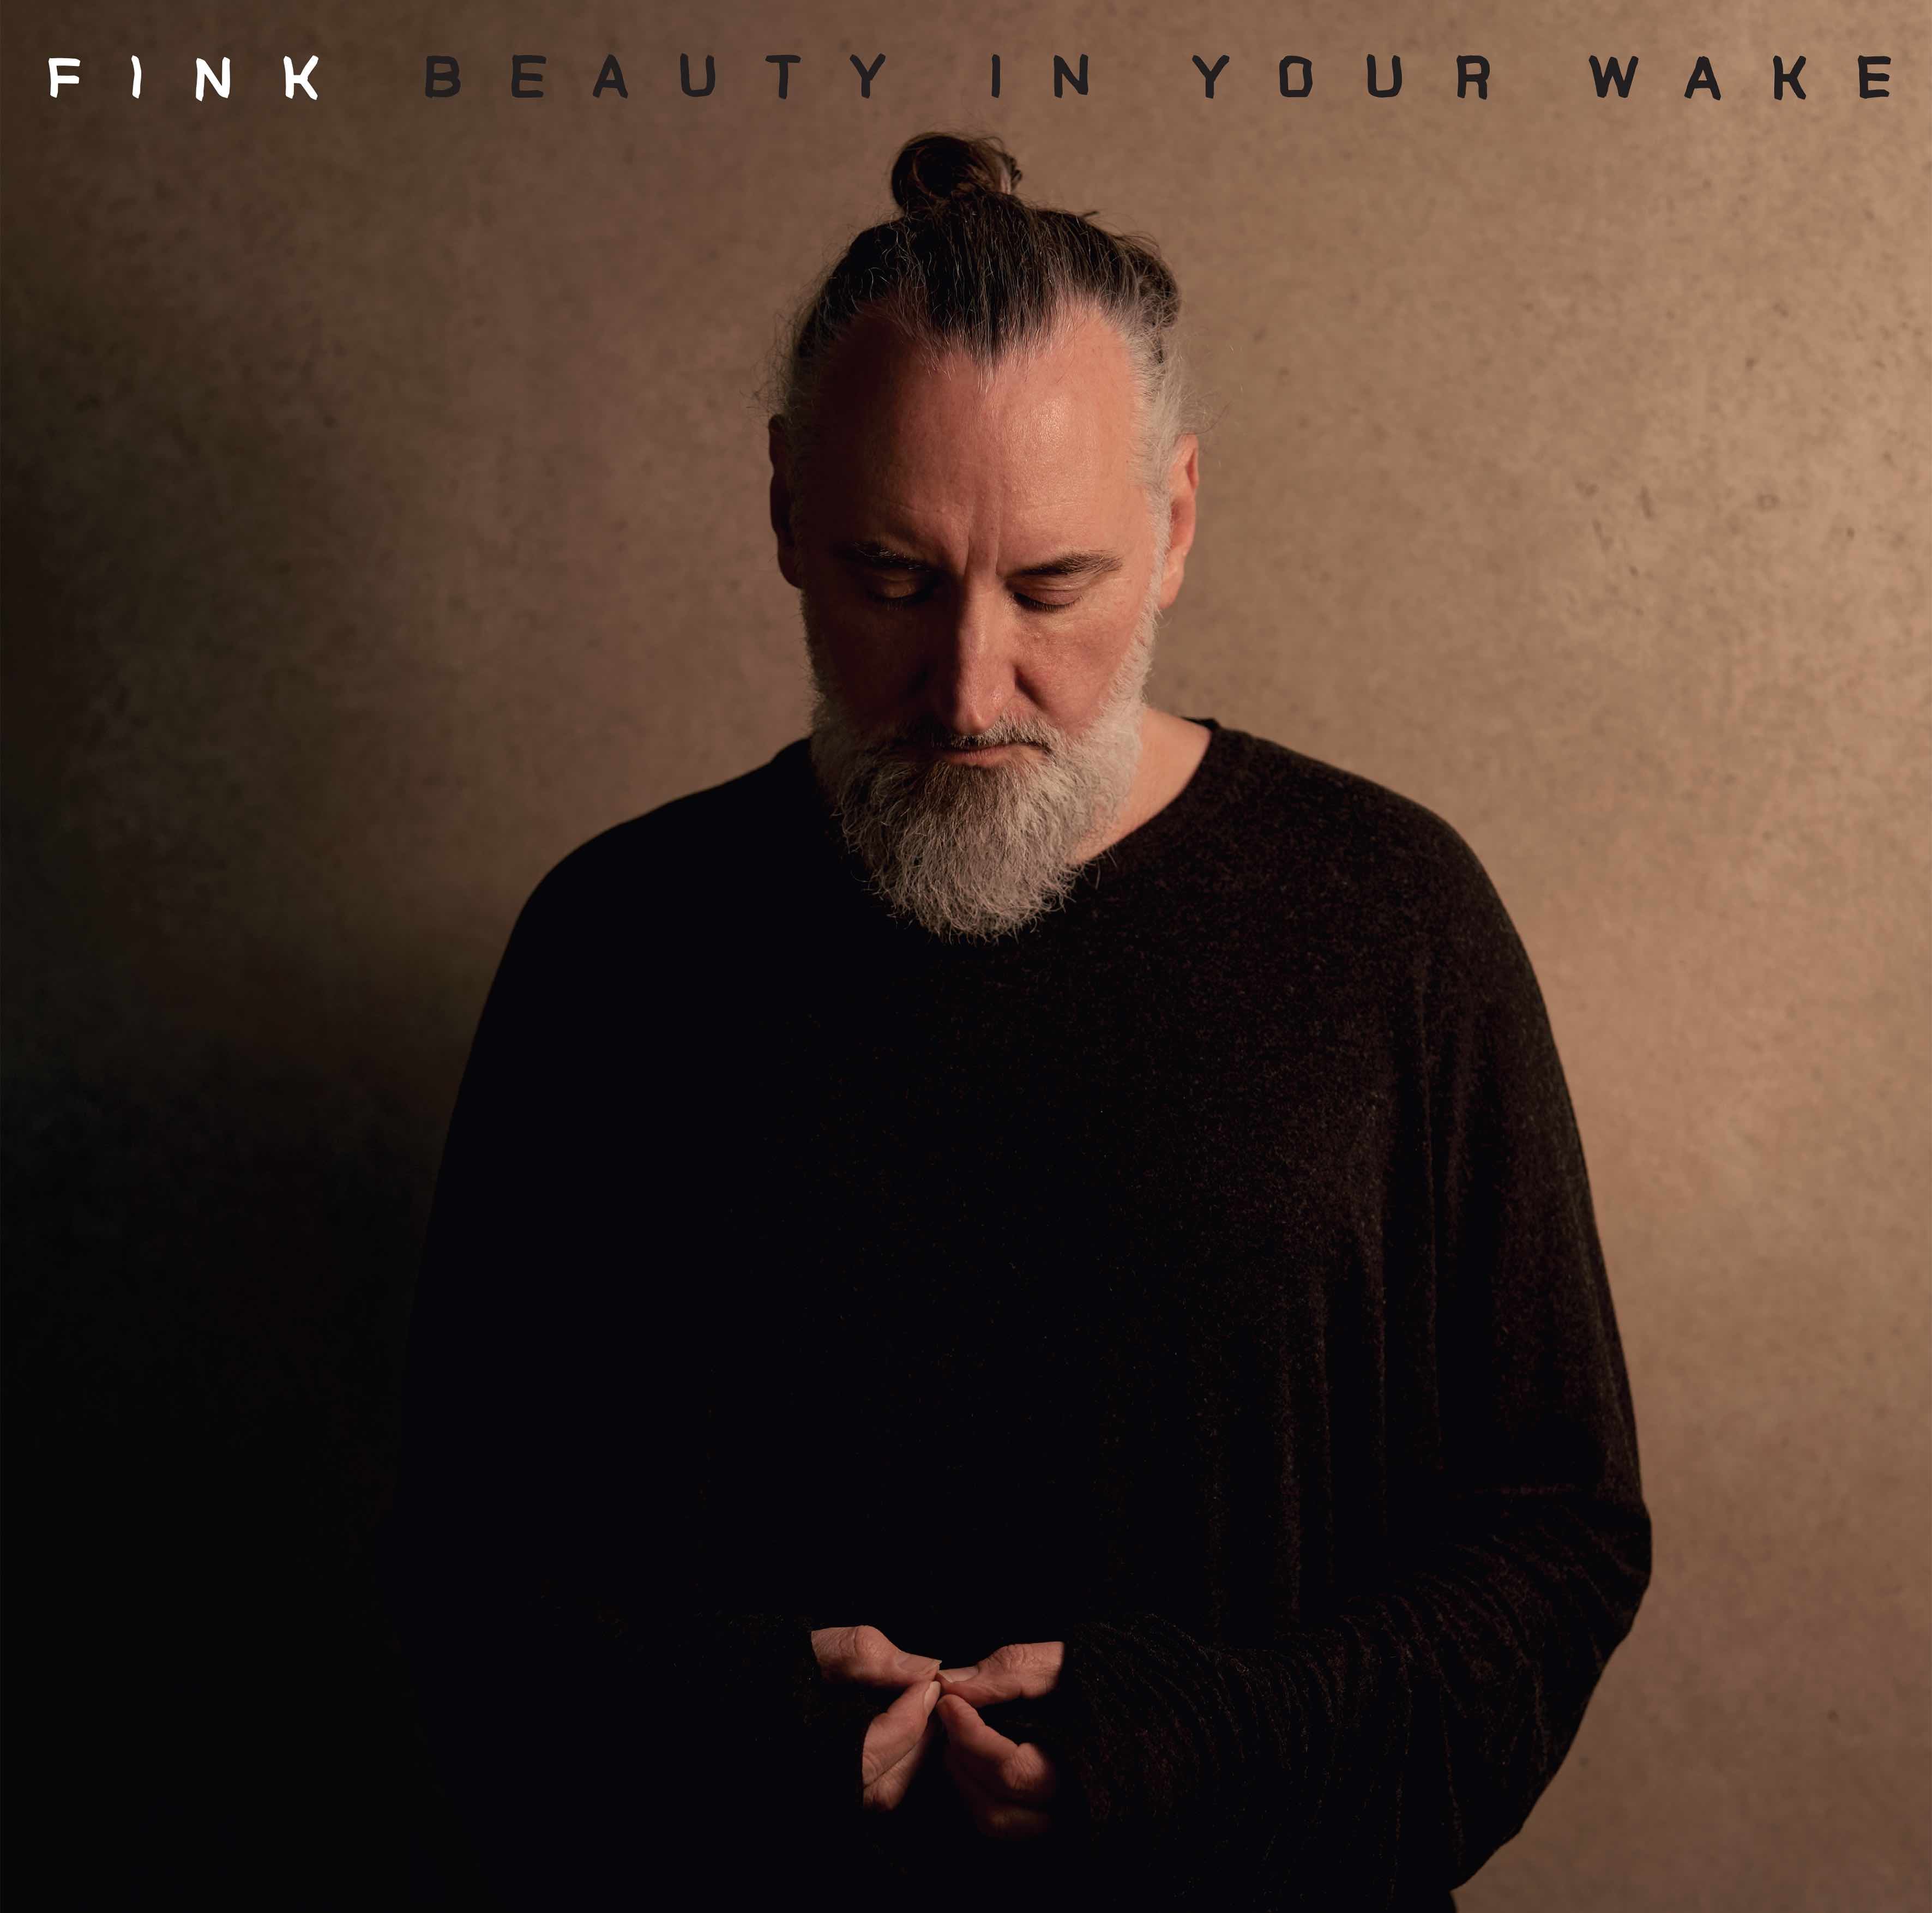 Fink - Beauty In Your Wake: Limited Deluxe CD